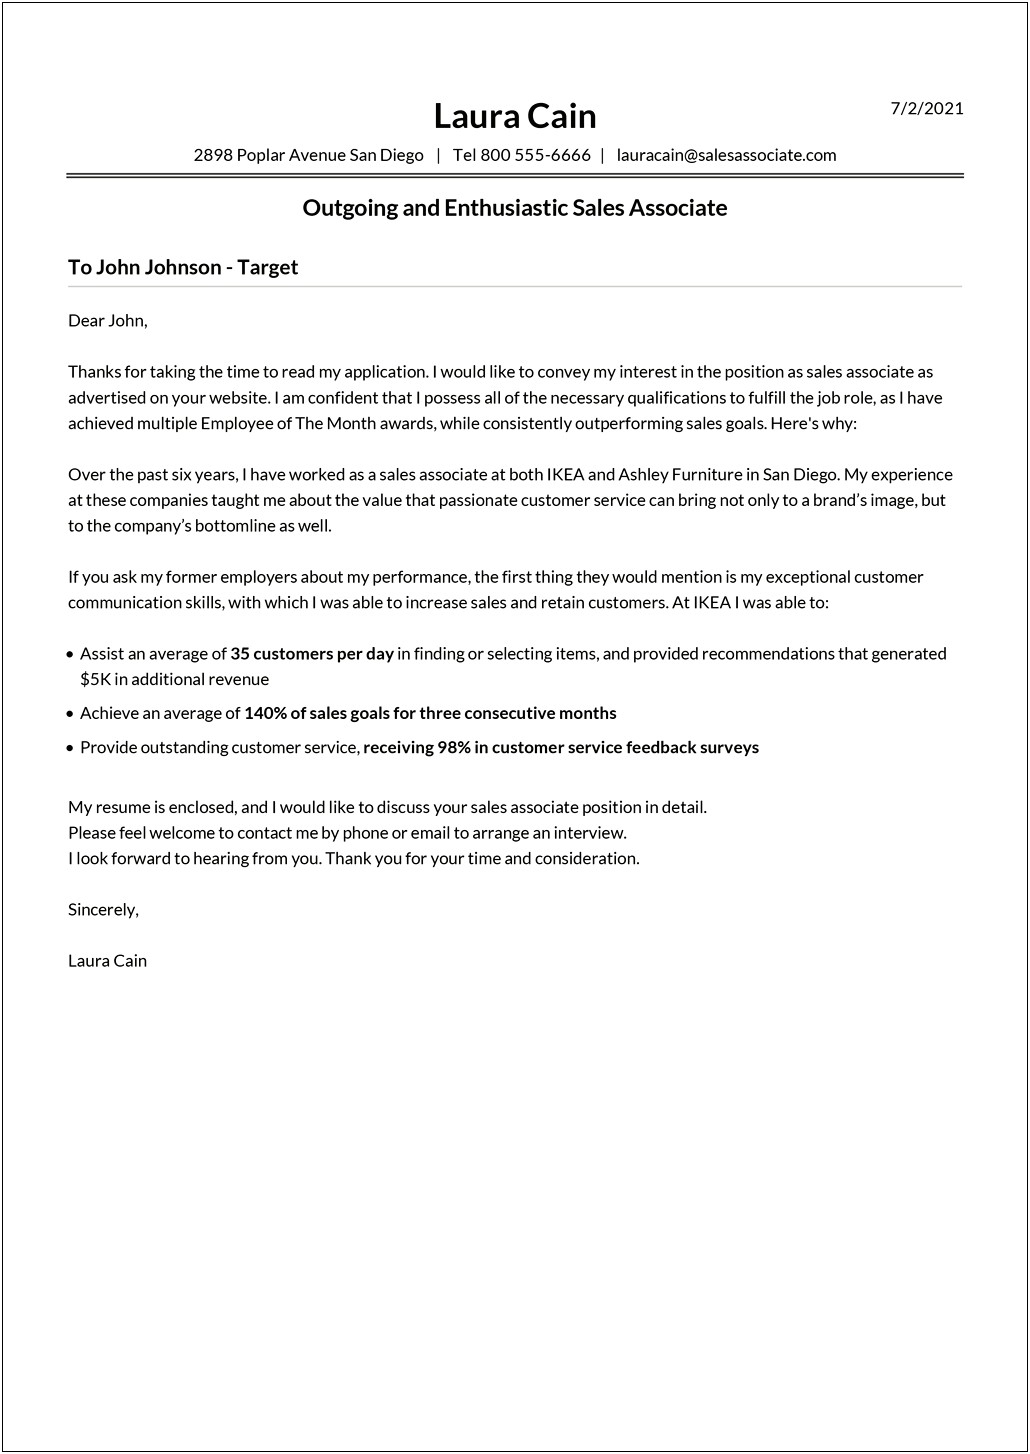 Resume Cover Letter Template For Free